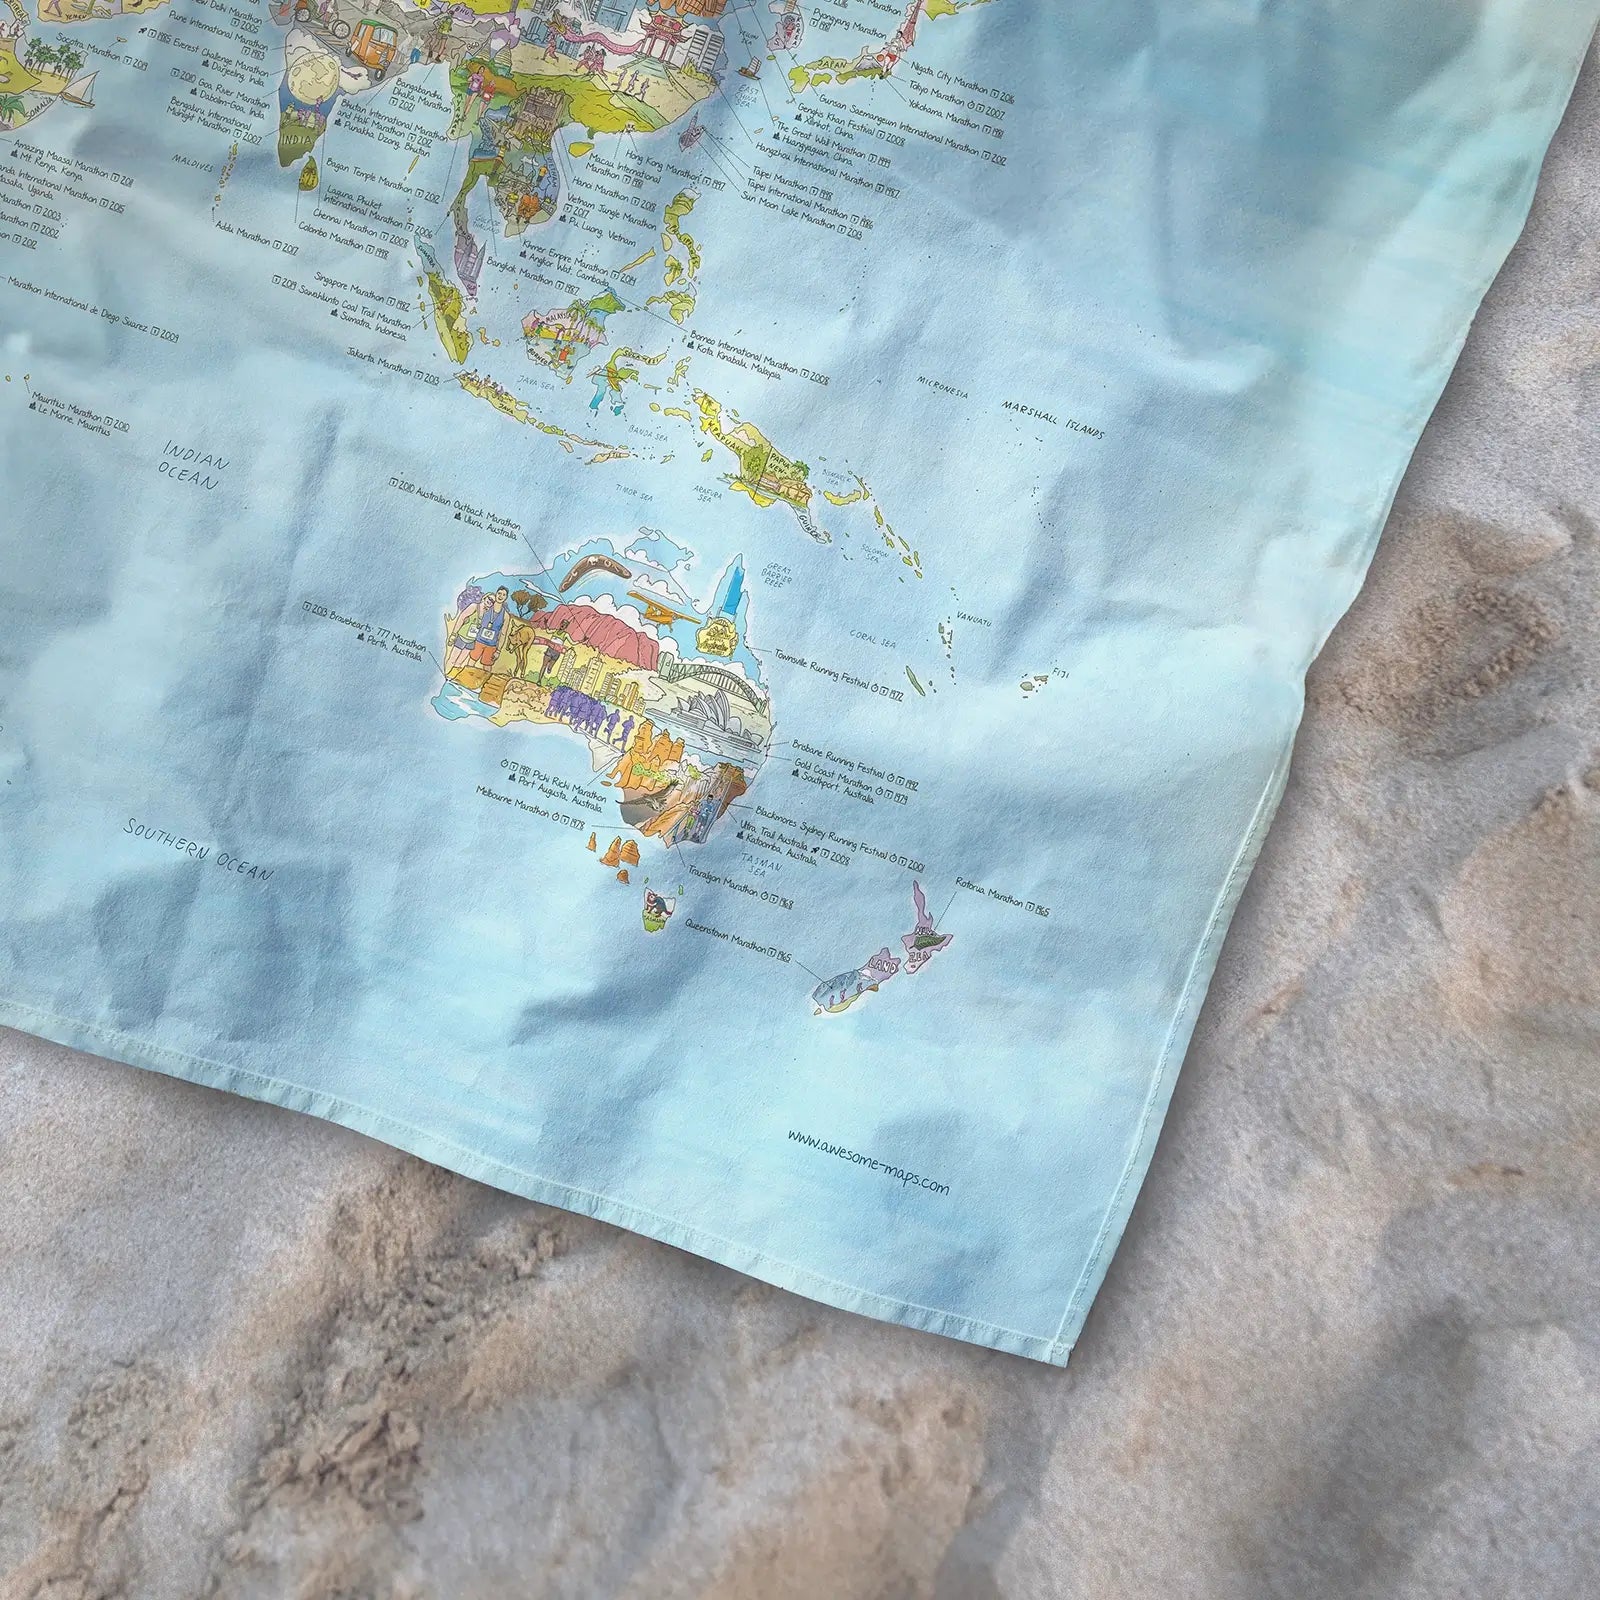 Bottom right corner of the Running Map towel of the world lying on the sand